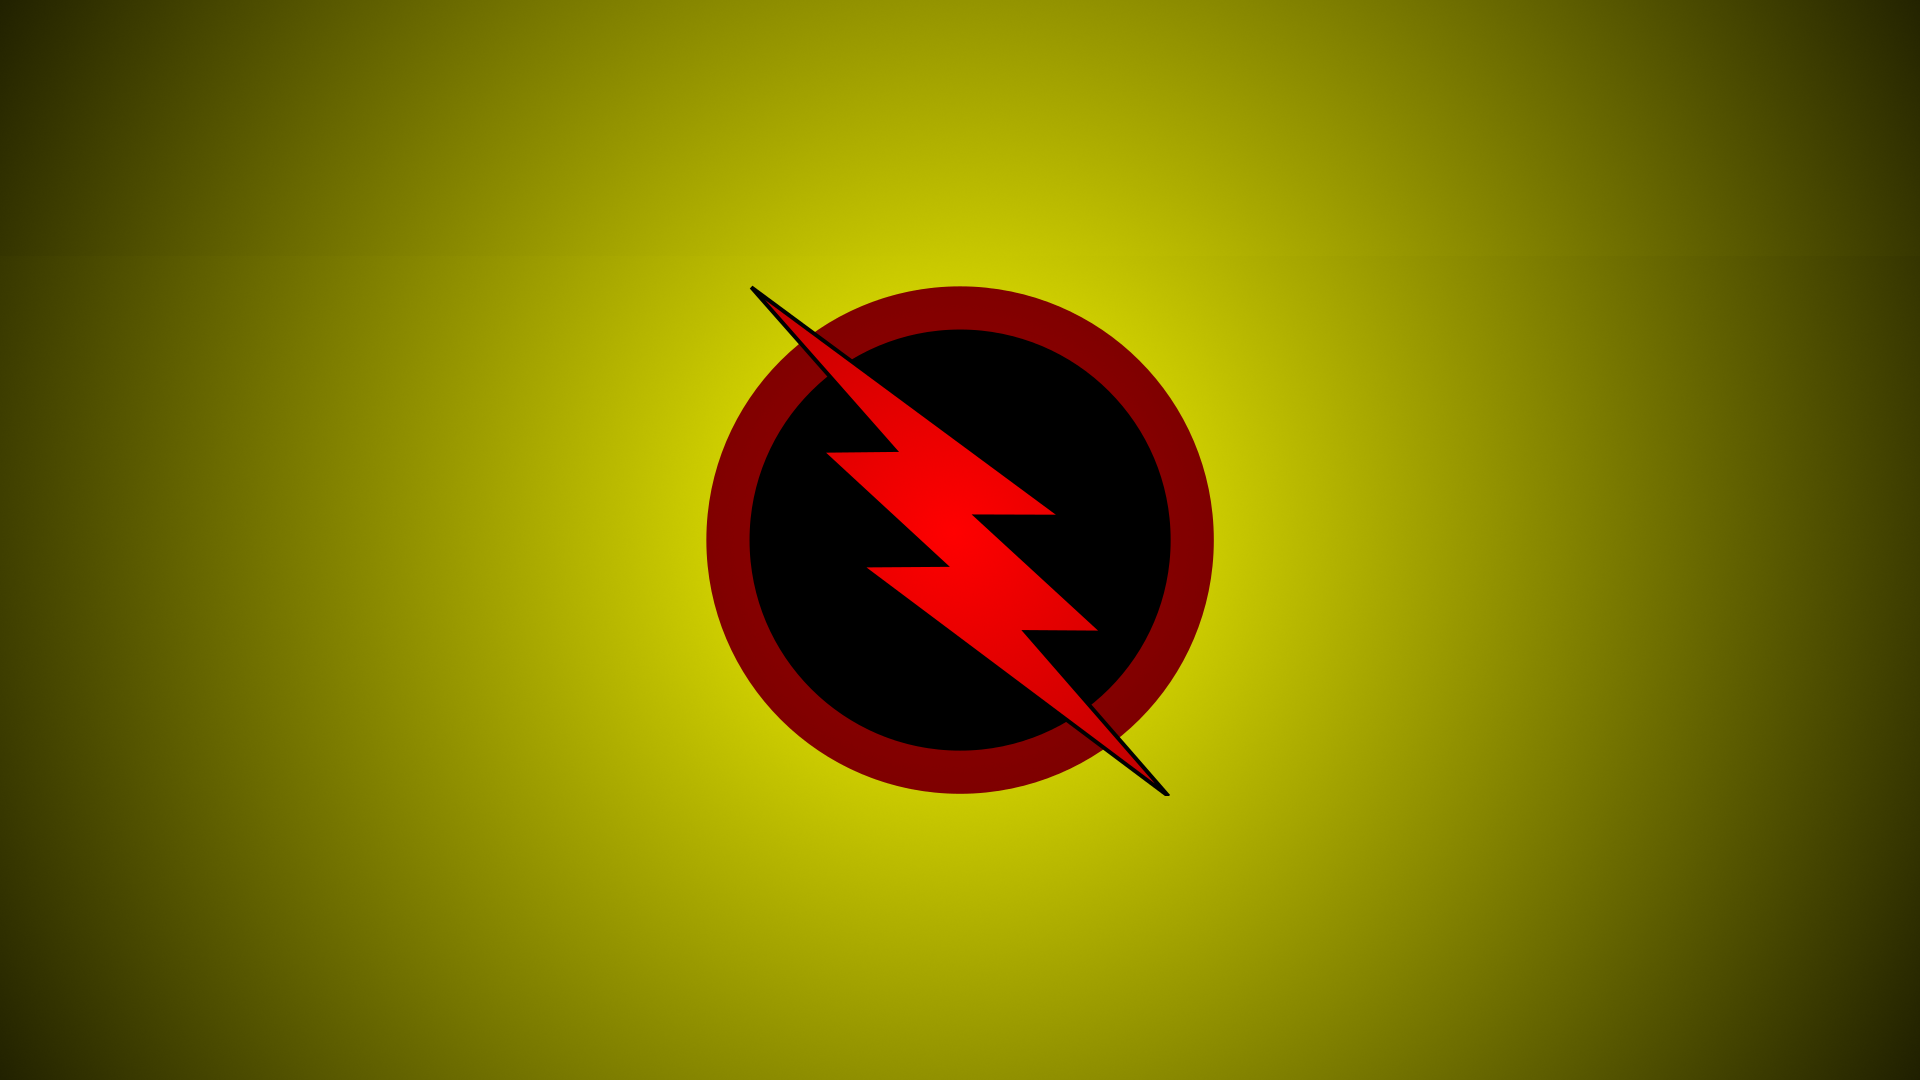 The Flash and The Reverse Flash Wallpapers - Album on Imgur